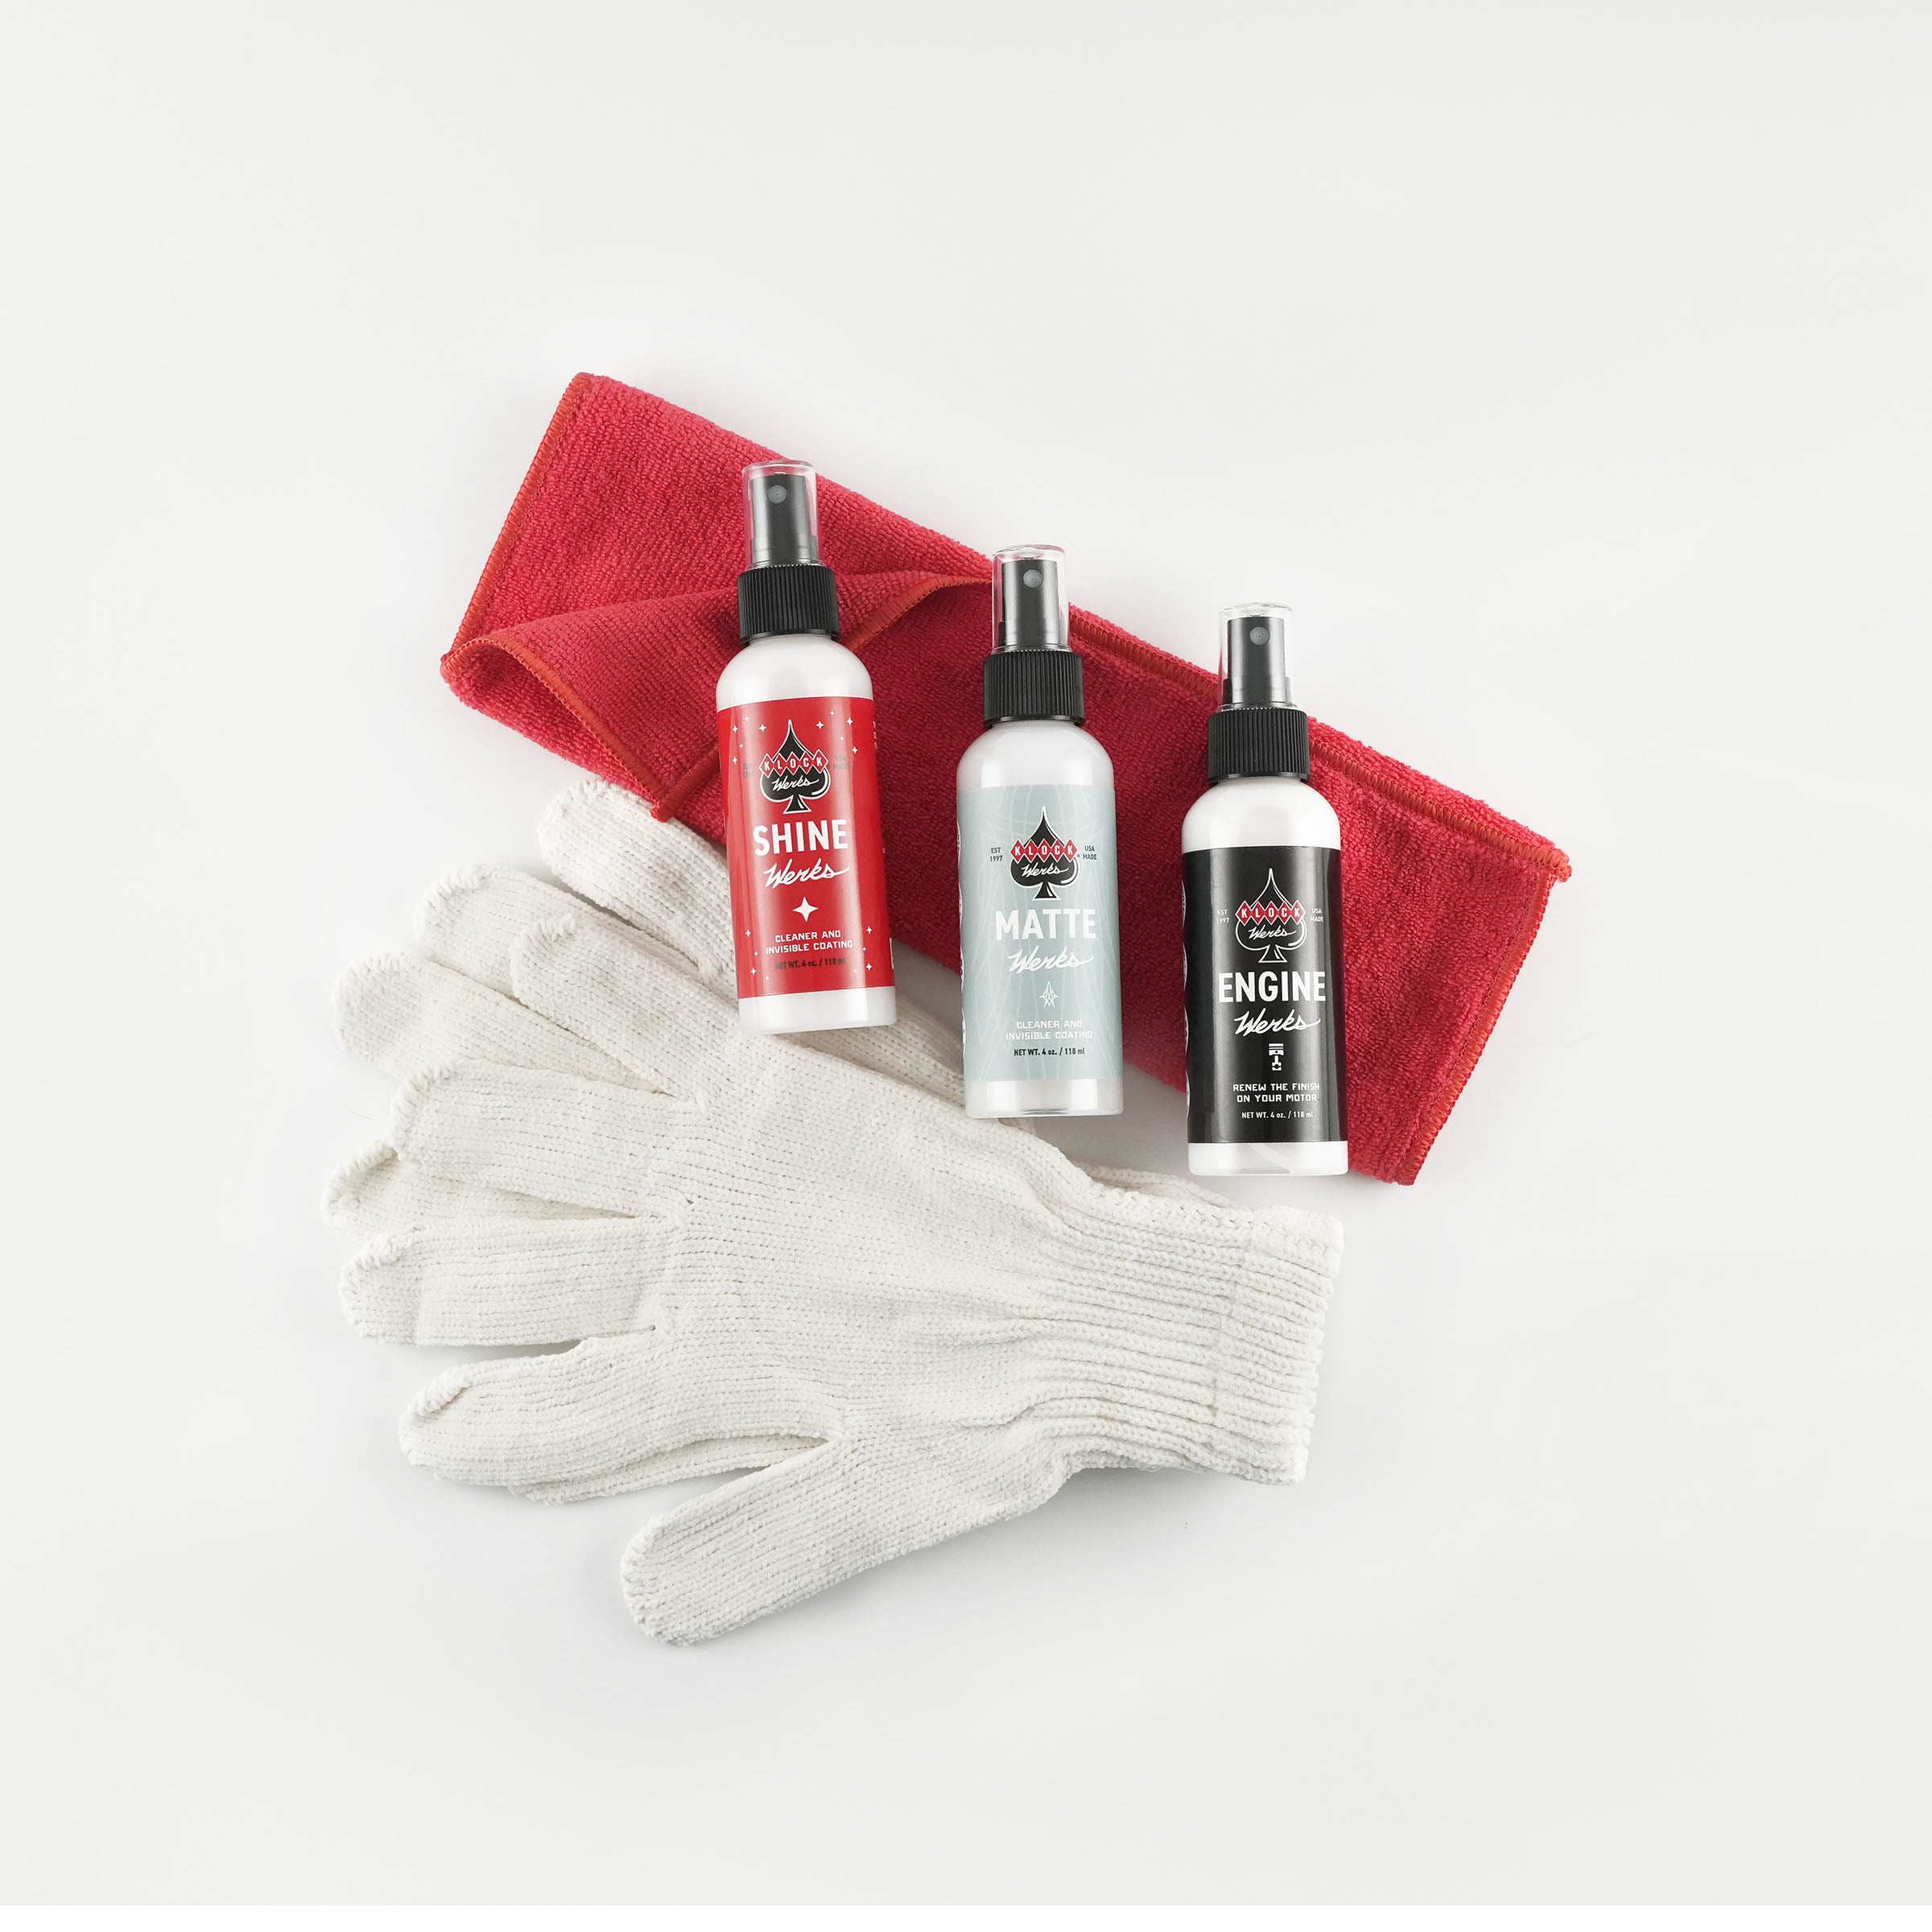 Klean Werks Cleaning Kit(The complete Klean Werks Kit includes a 4 oz. bottle of Shine Werks, Matte Werks and Engine Werks as well as 1 microfiber cloth and 1 pair of polishing gloves)